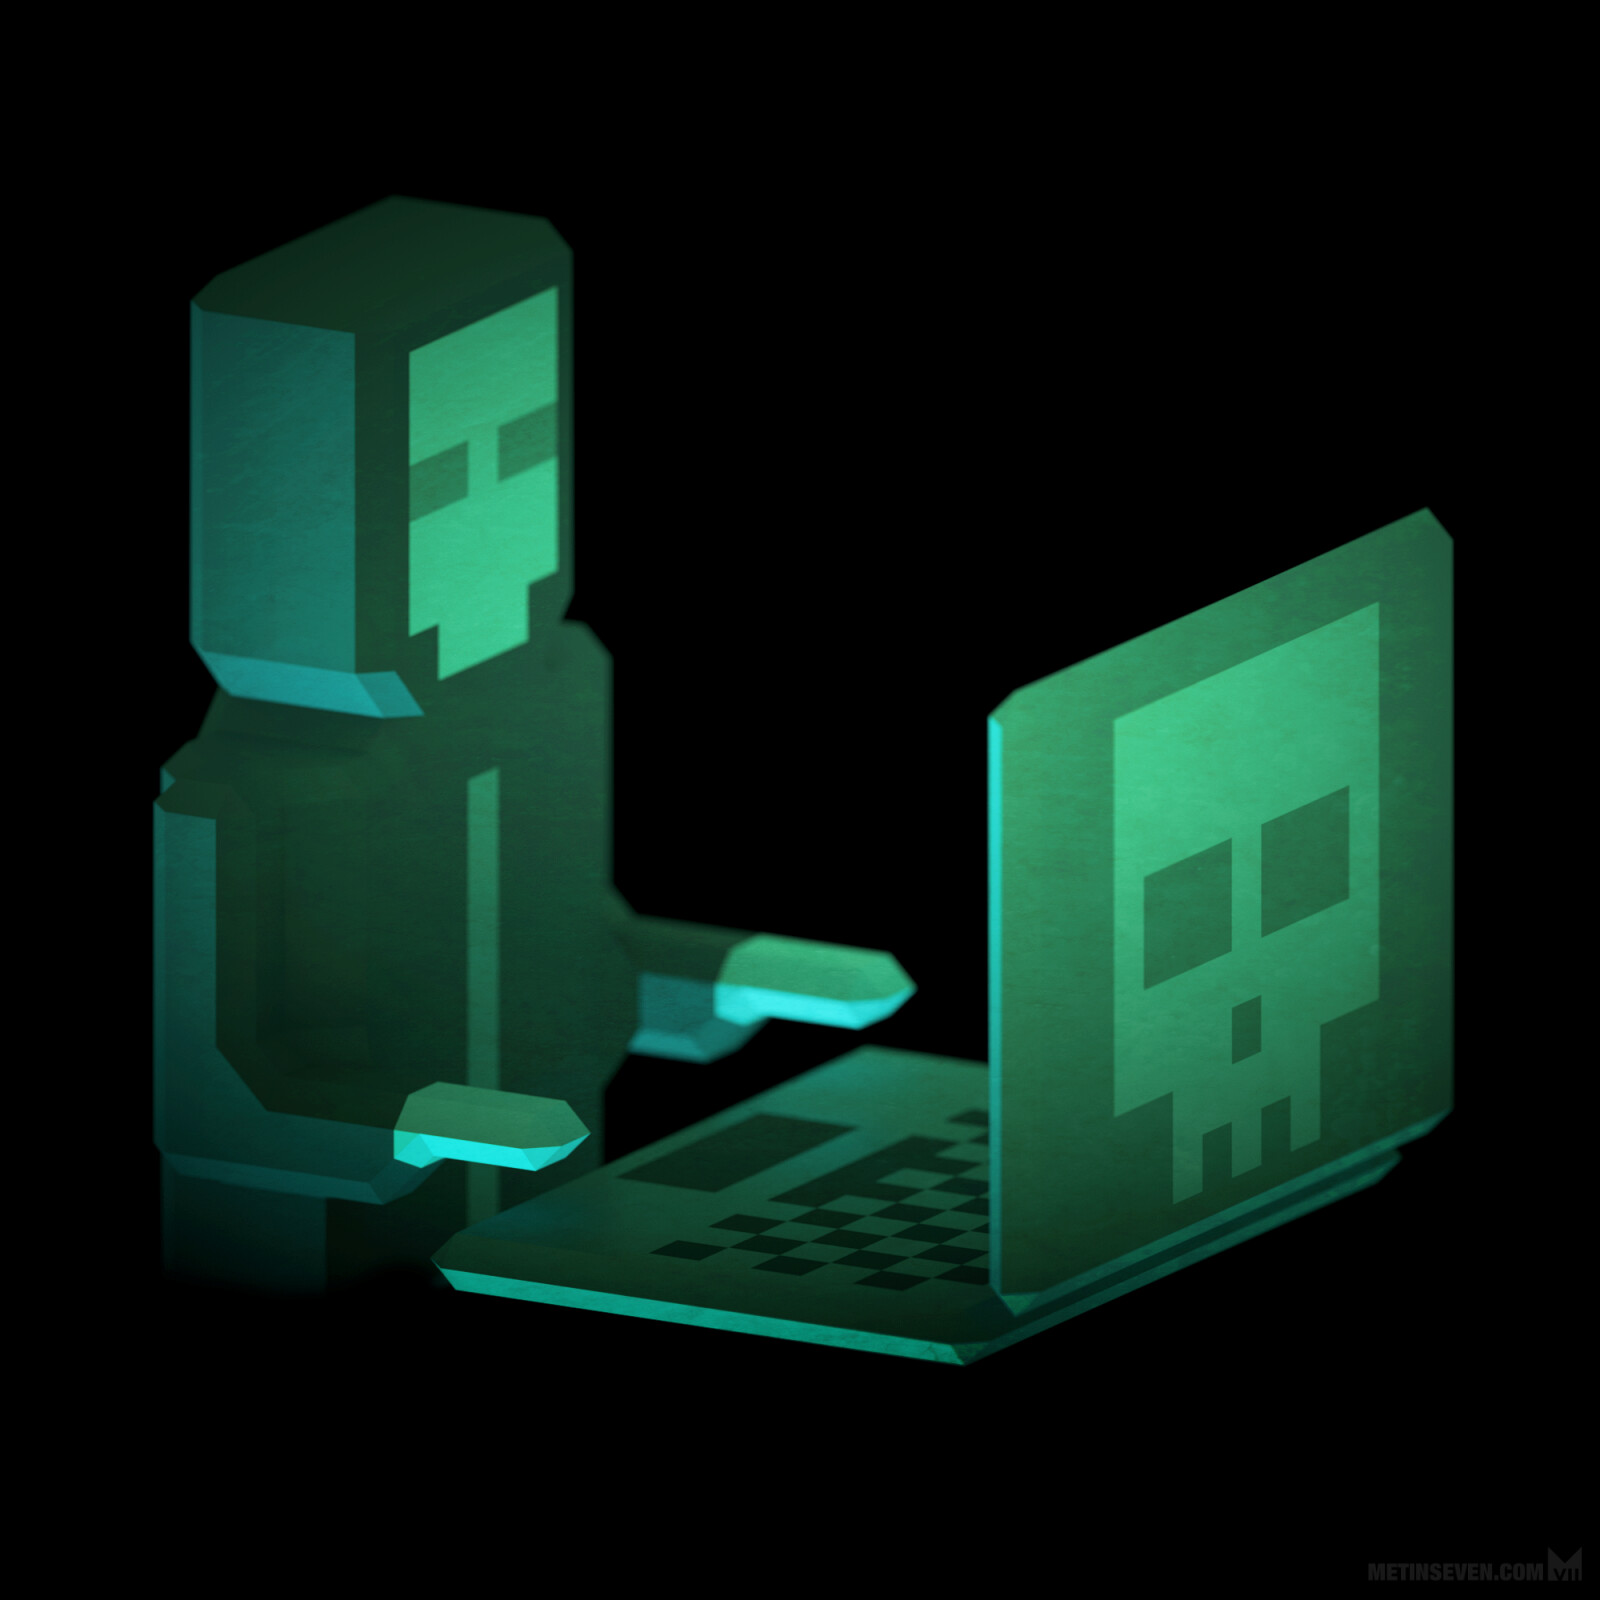 Low-polygon 3D style hacker character design and artwork.